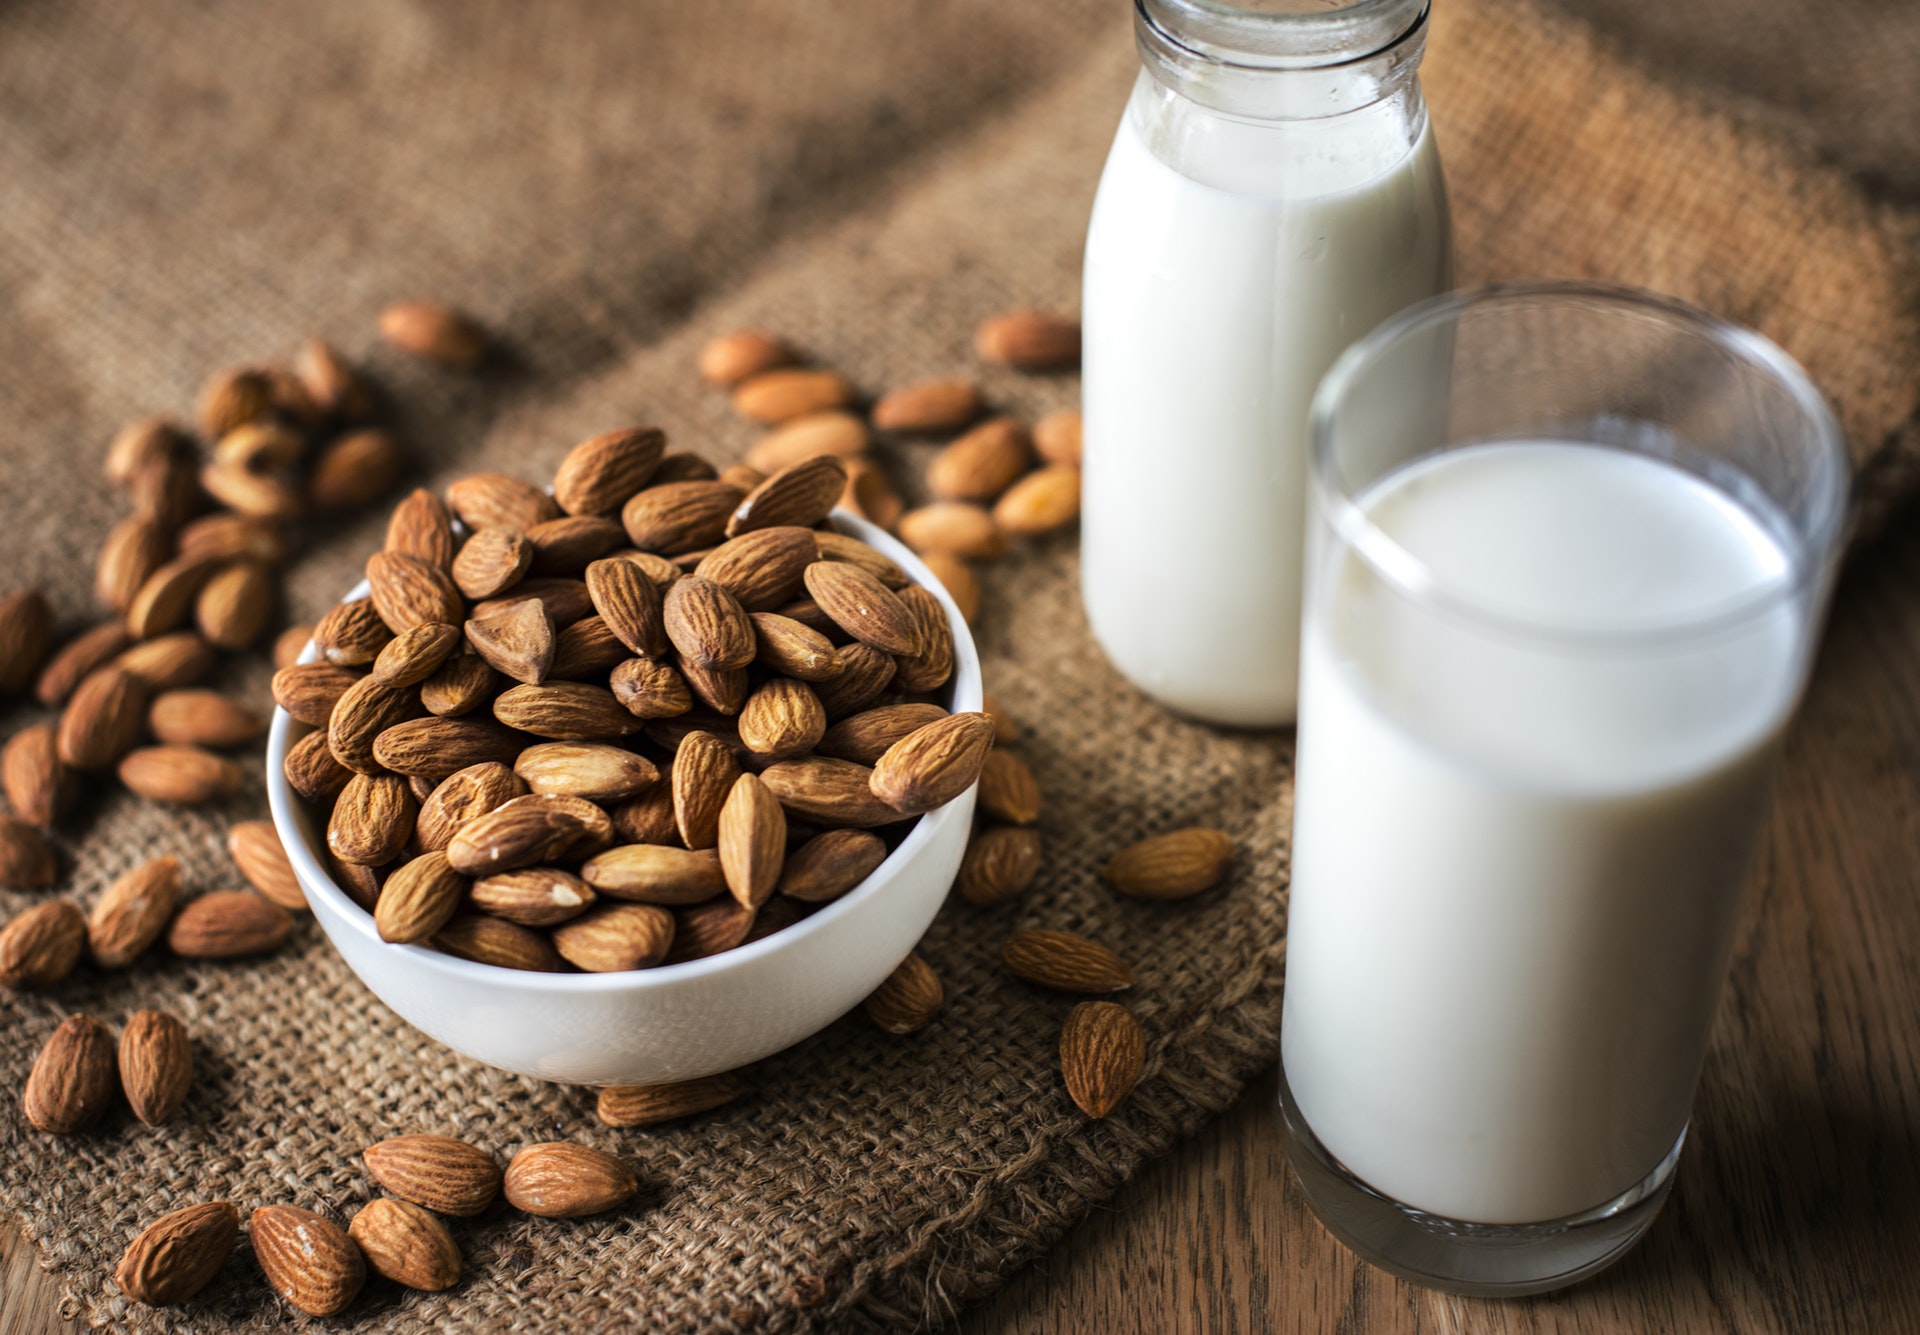 Almond milk and soy milk can keep you healthy